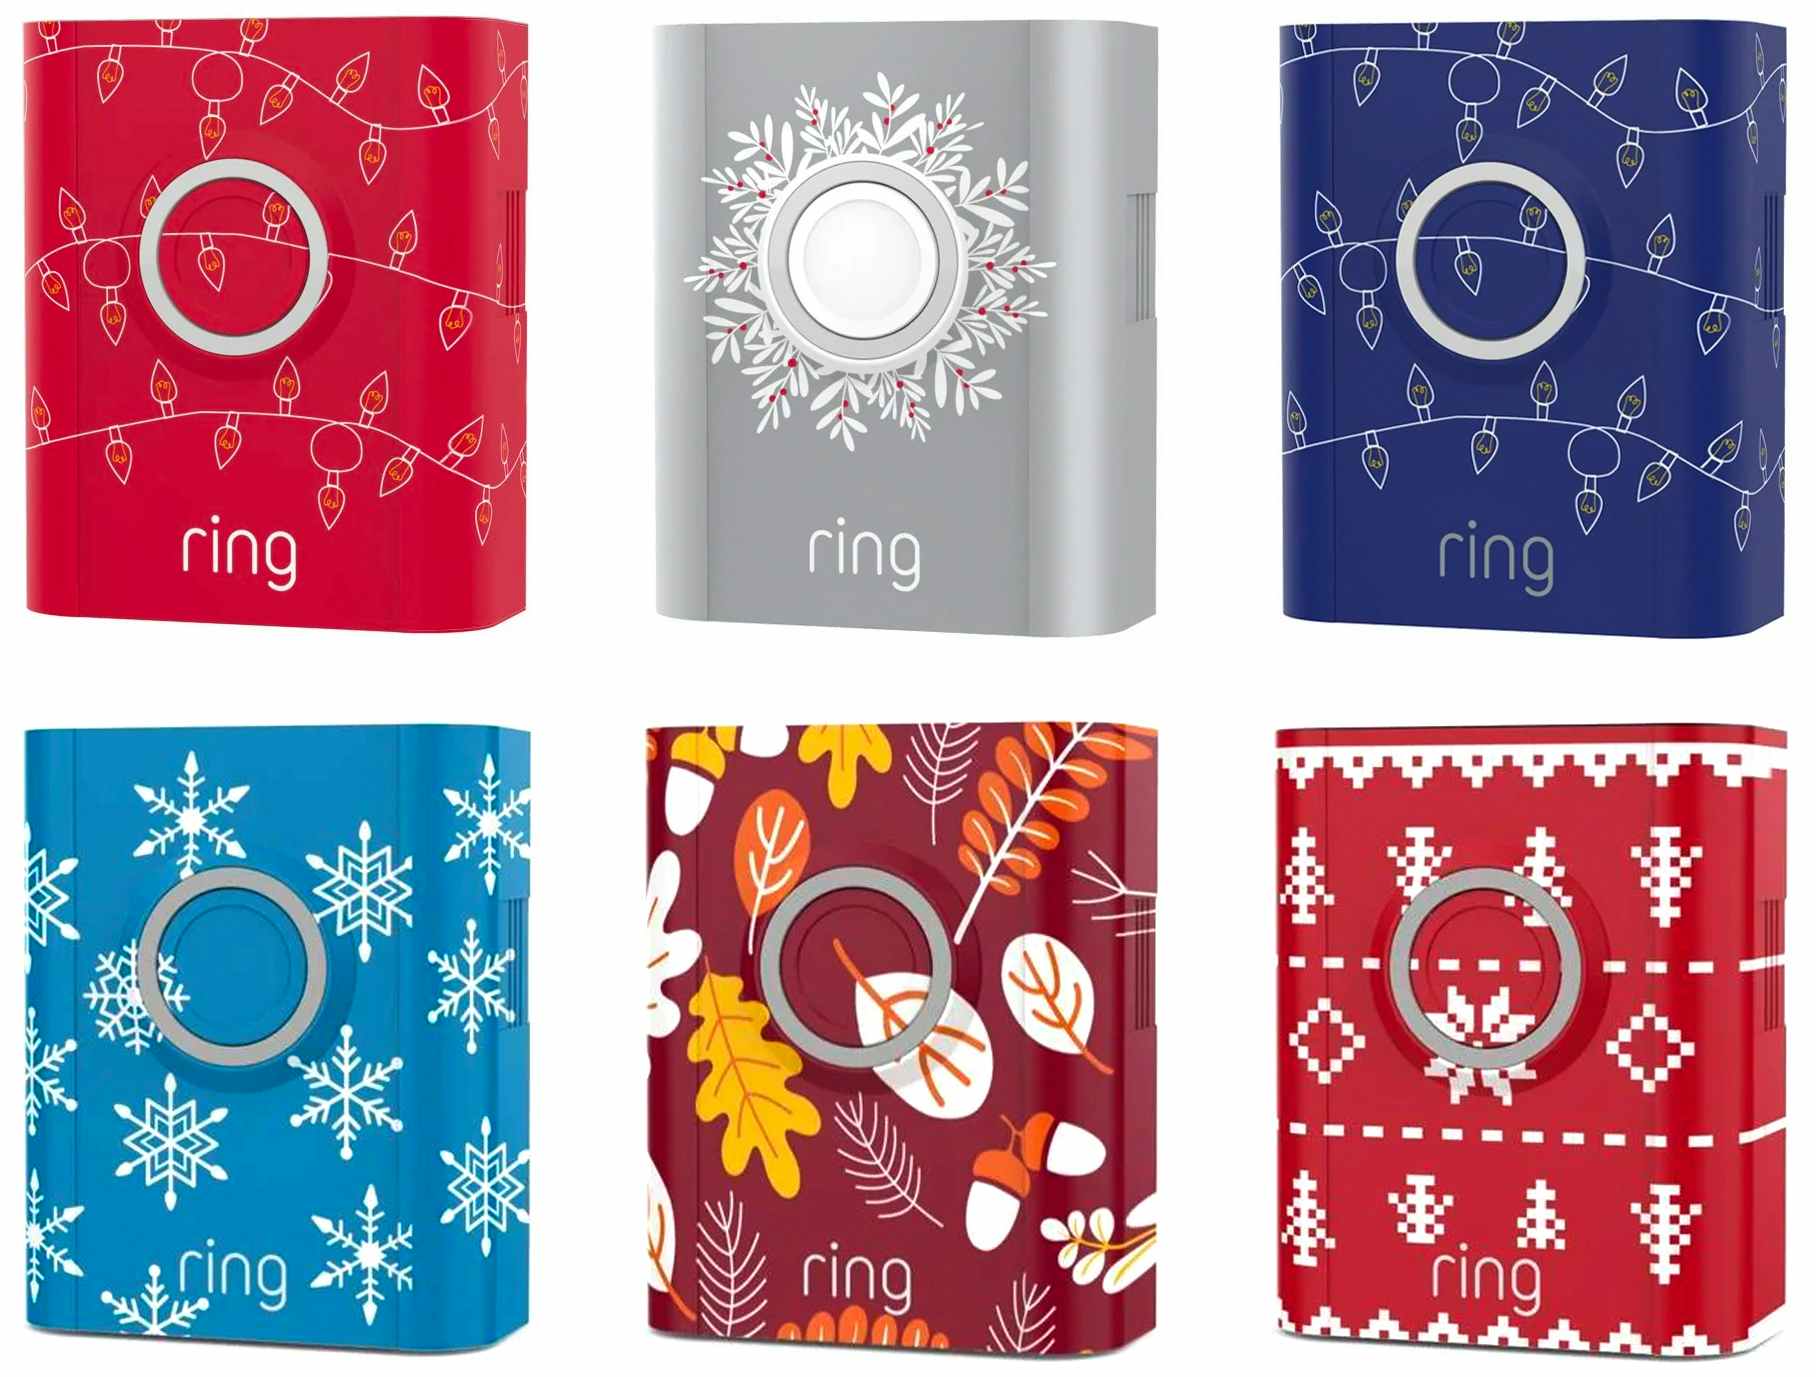 Six different designs of Ring doorbell holiday faceplates